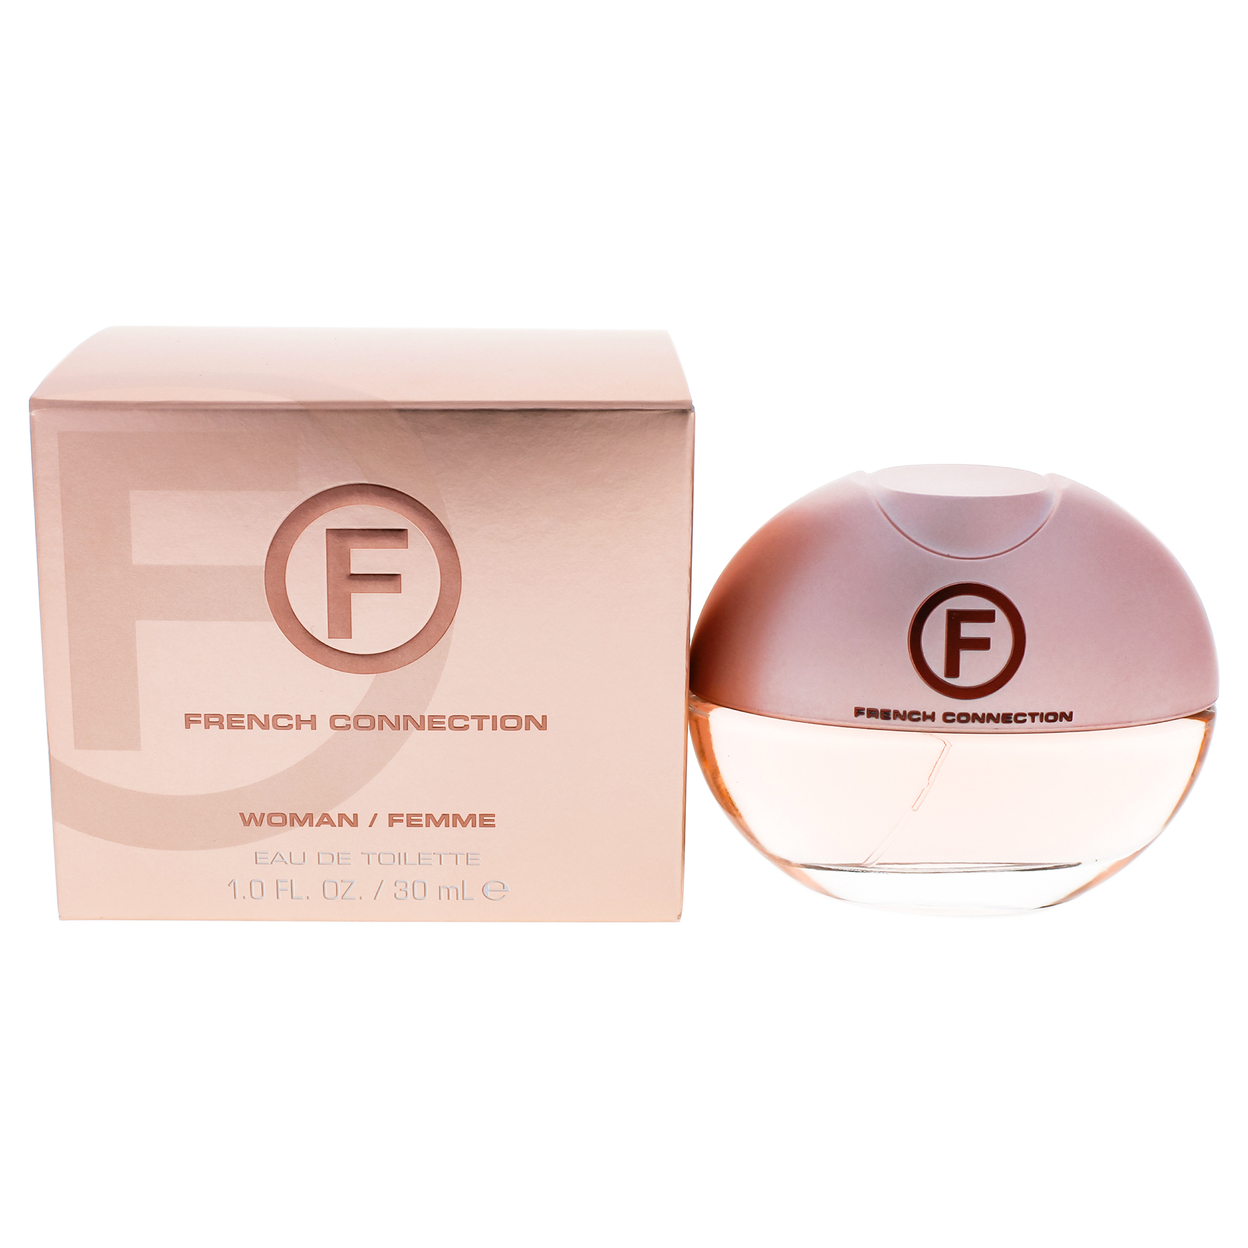 French Connection UK French Connection Femme EDT Spray 1 Oz